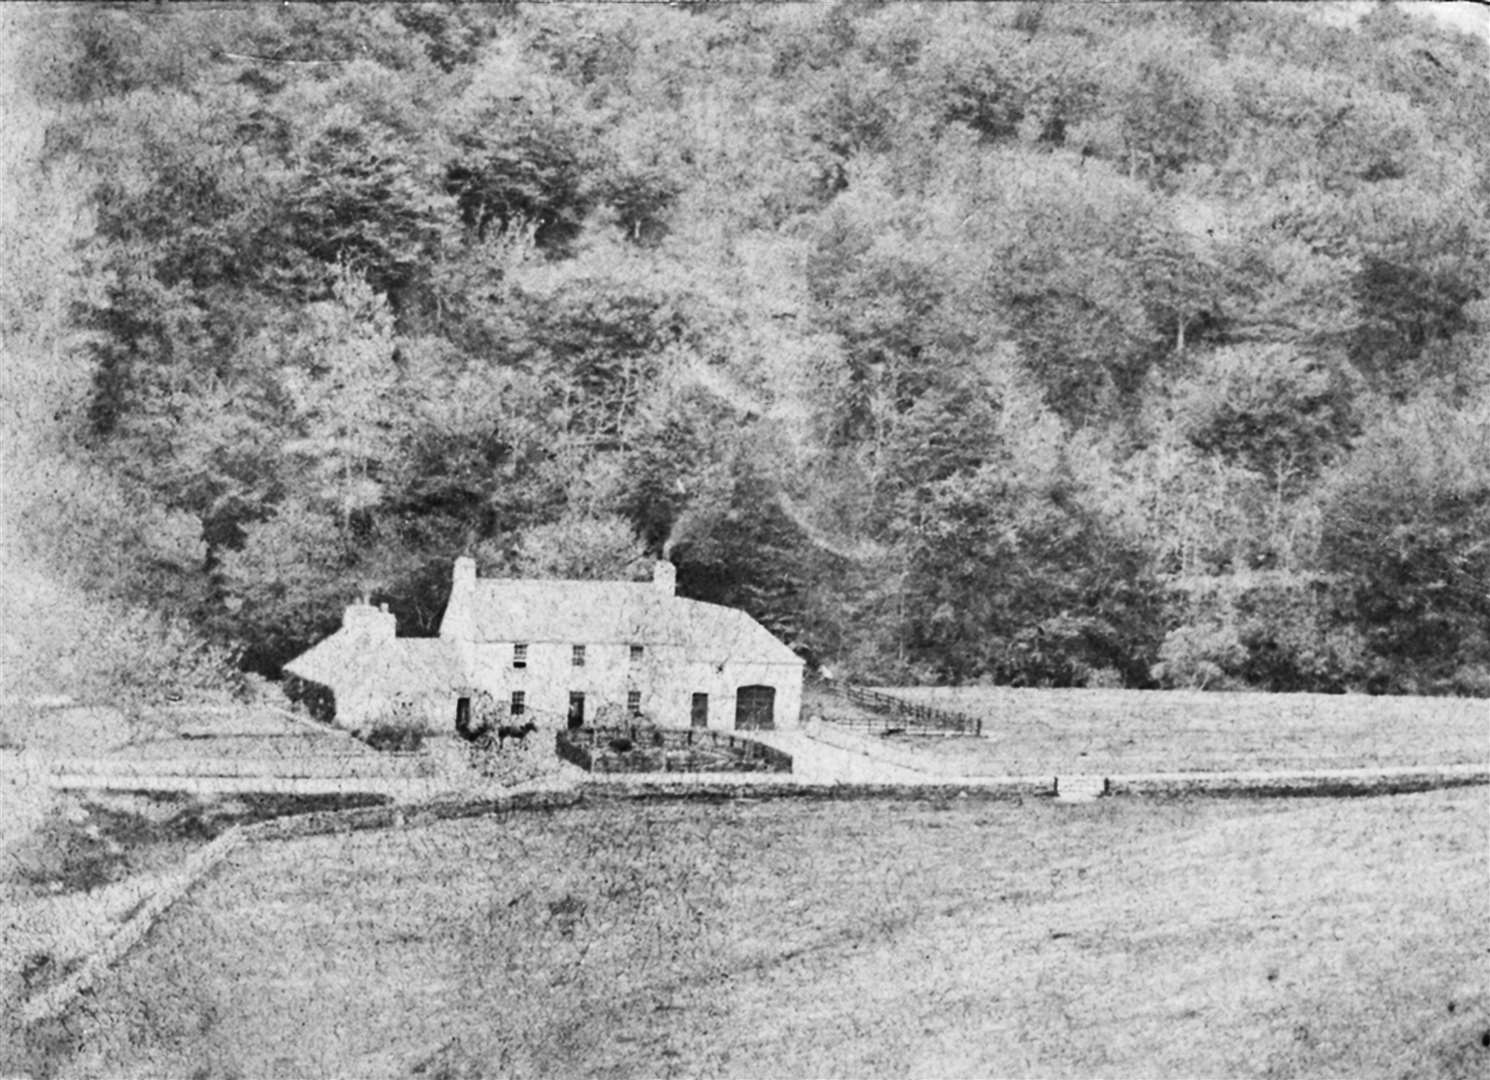 A photo of Berriedale House thought to have been taken by Alexander Johnston.